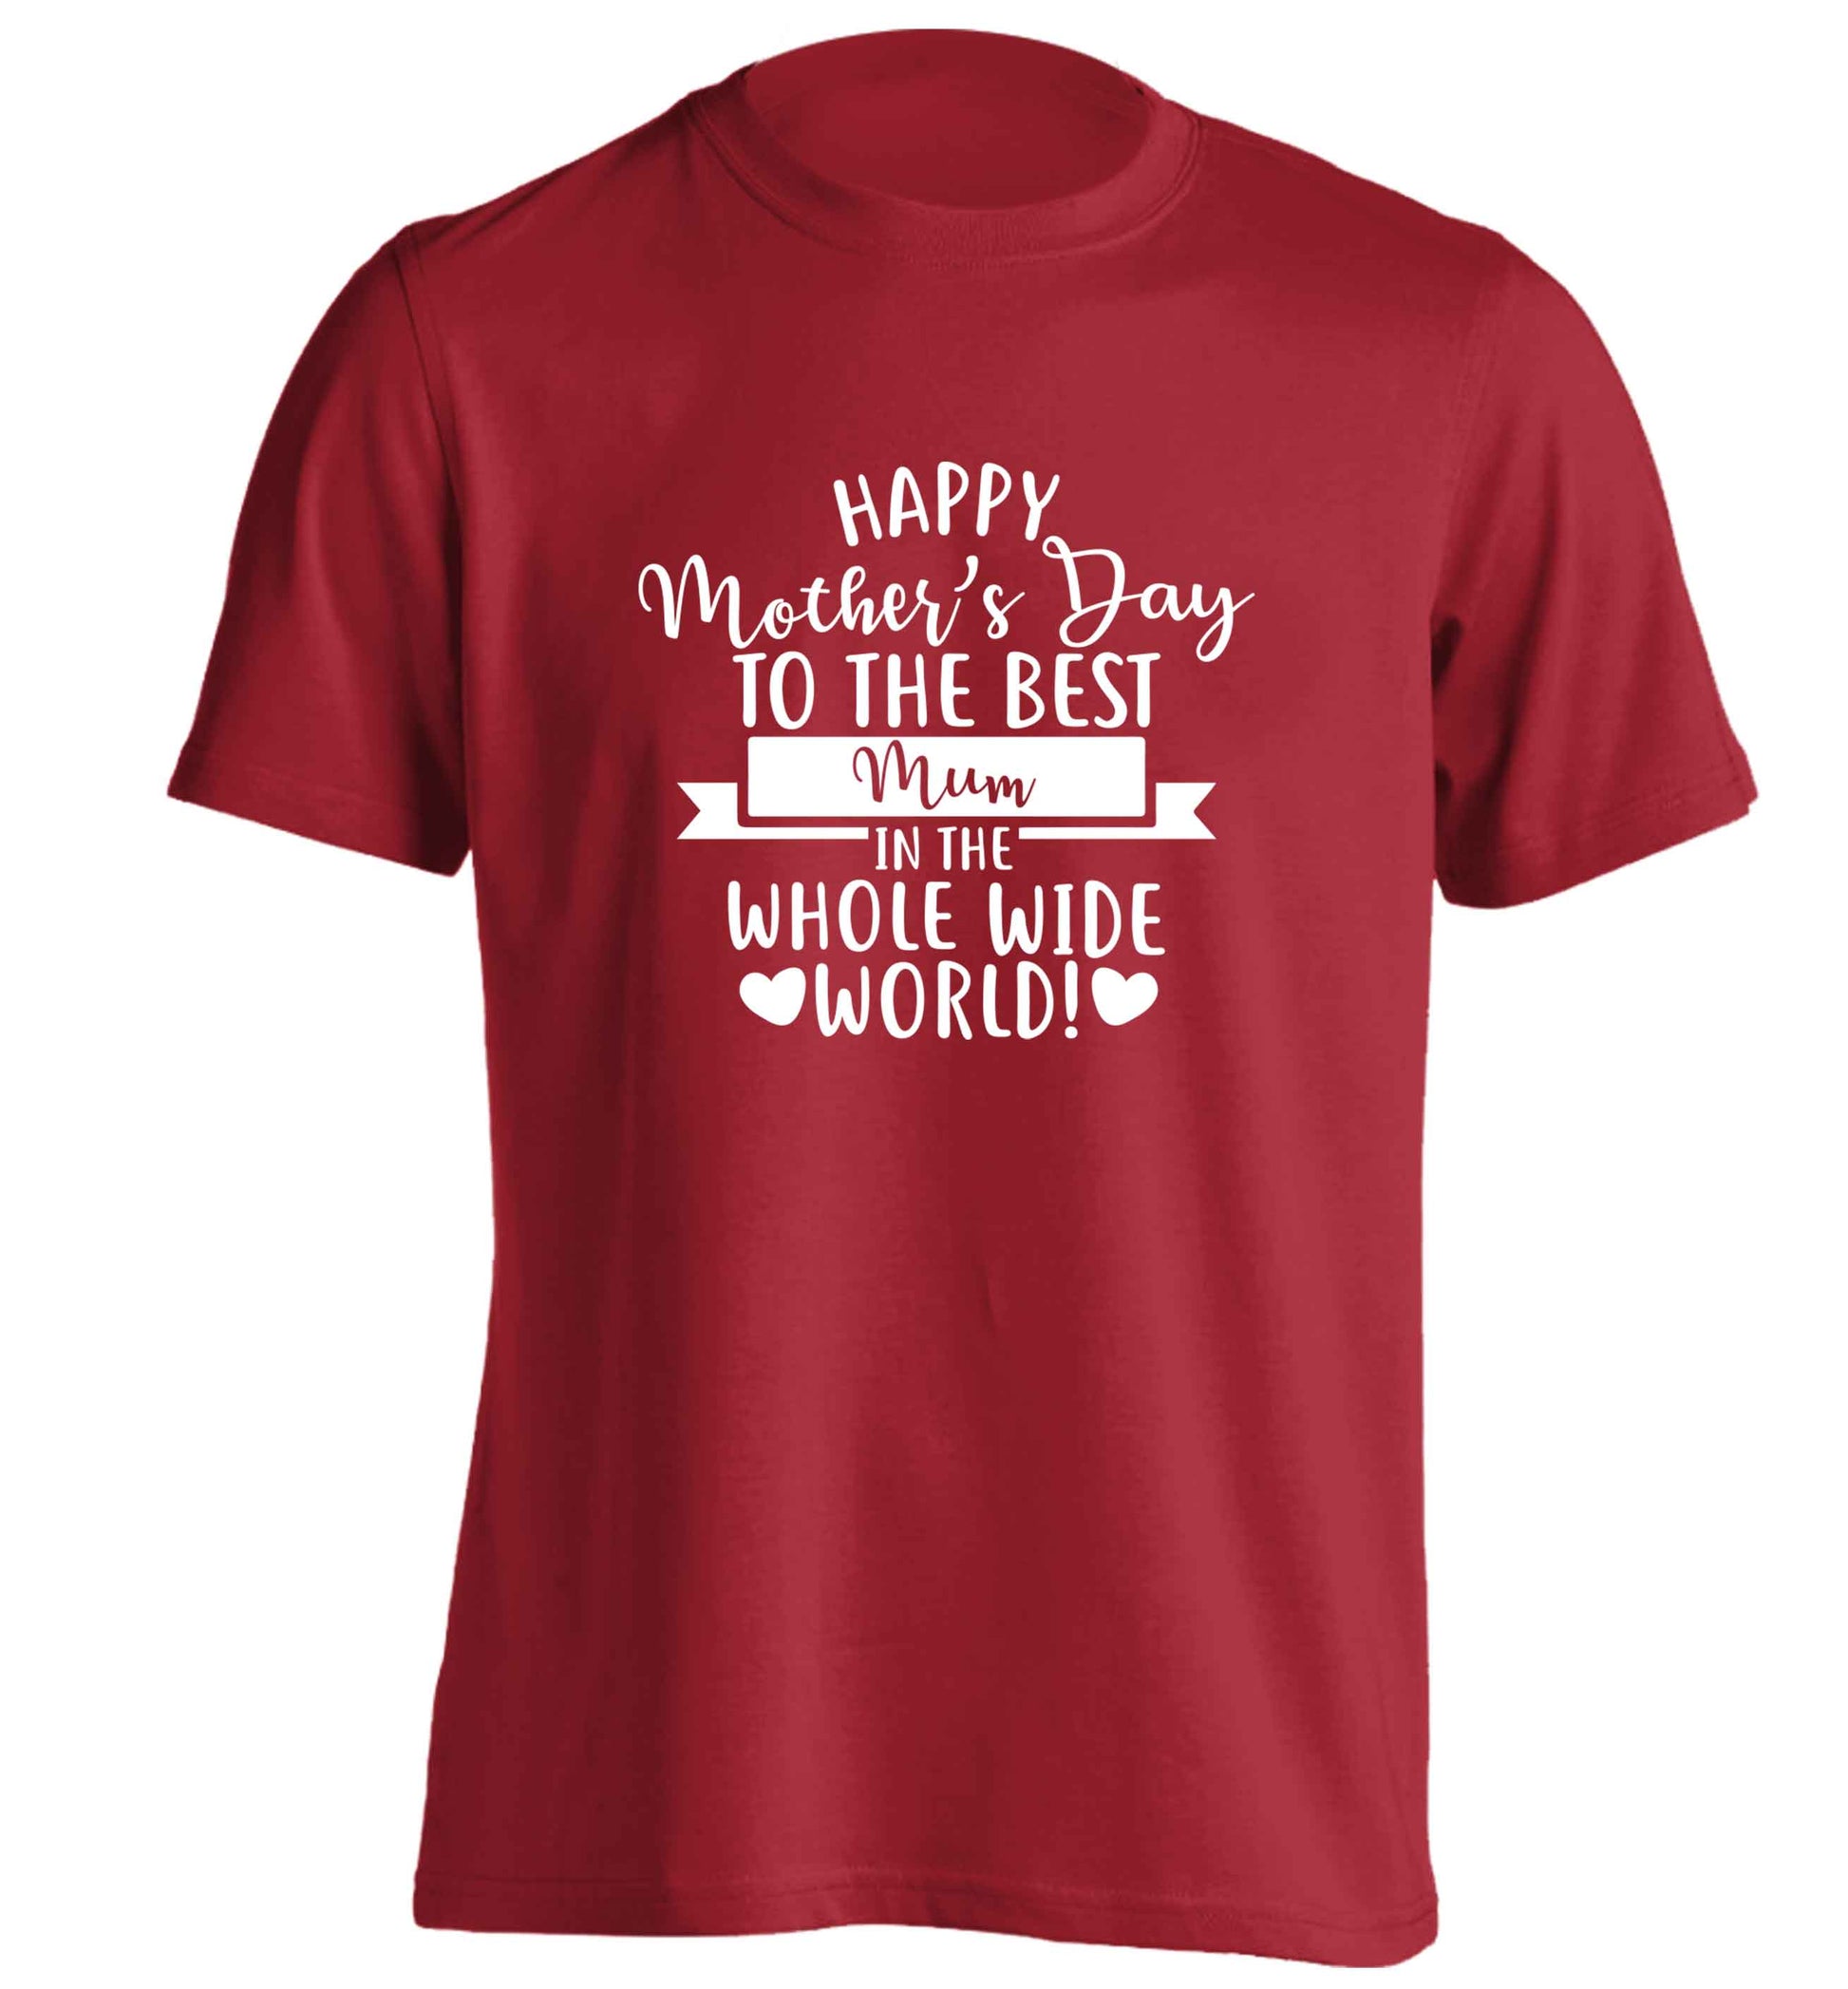 Happy mother's day to the best mum in the world adults unisex red Tshirt 2XL